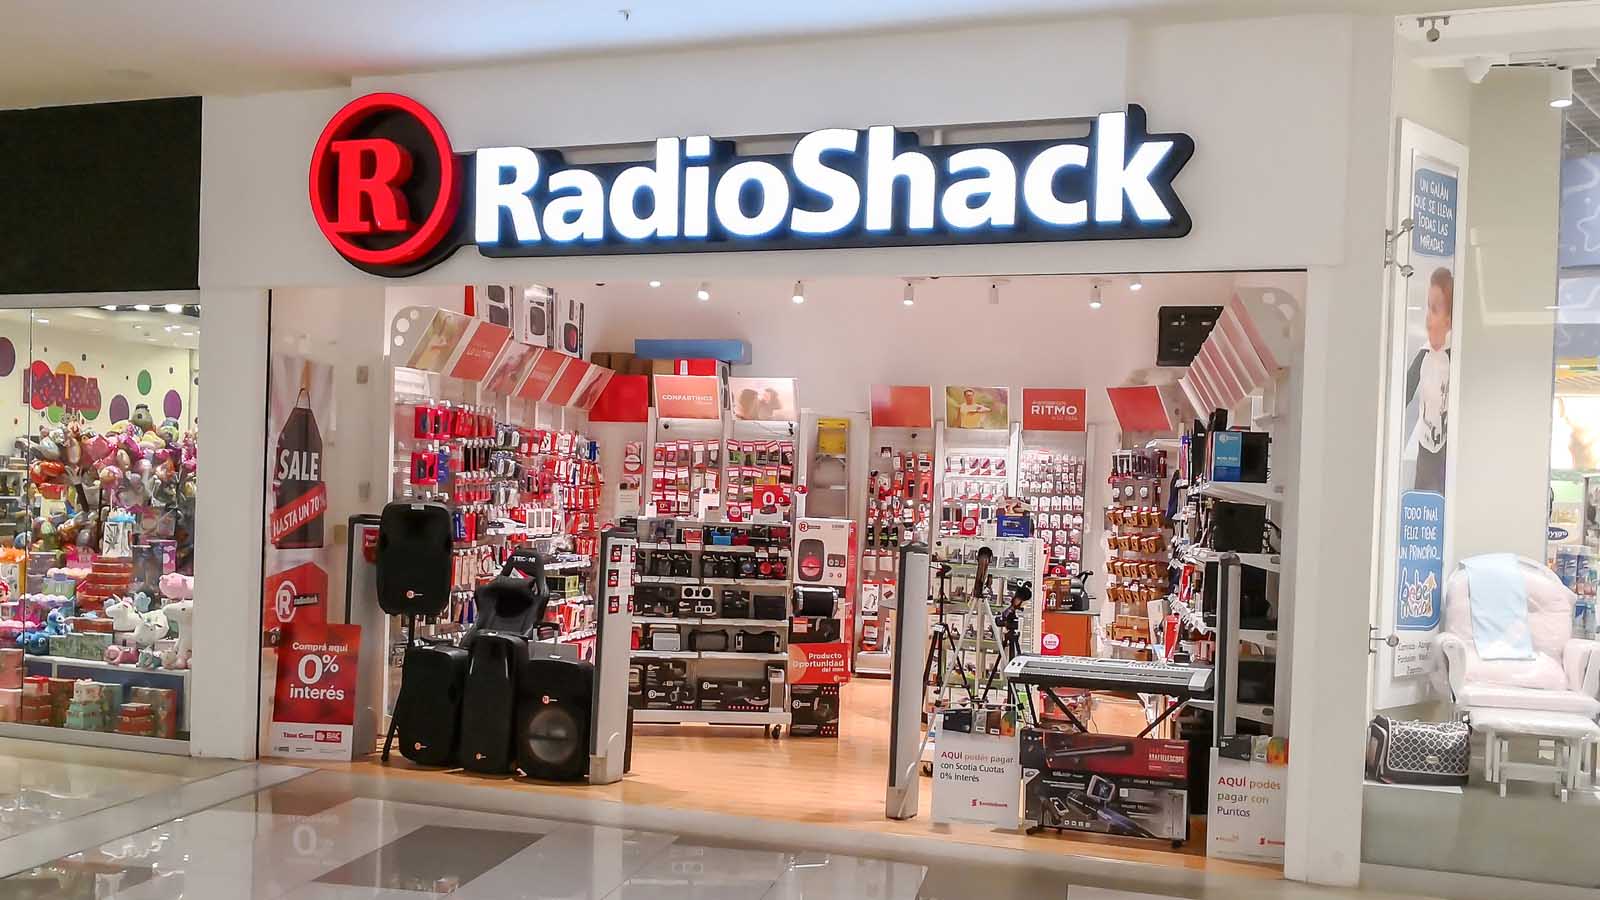 An image of a RadioShack storefront in a mall representing RadioShack Price Predictions.